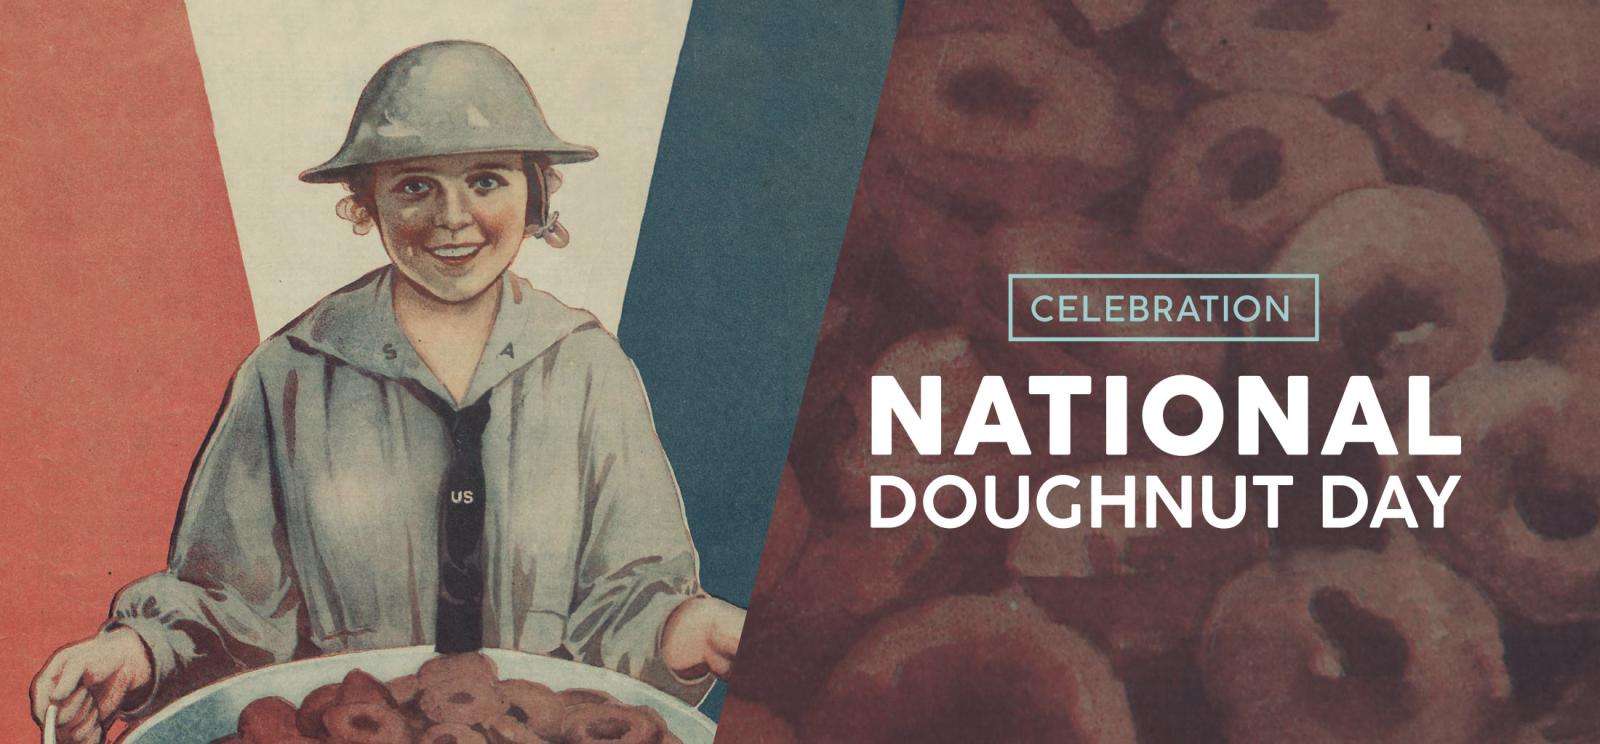 Image: Painting of a young white woman wearing a steel helmet holding a tub of donuts. Text: National Doughnut Day